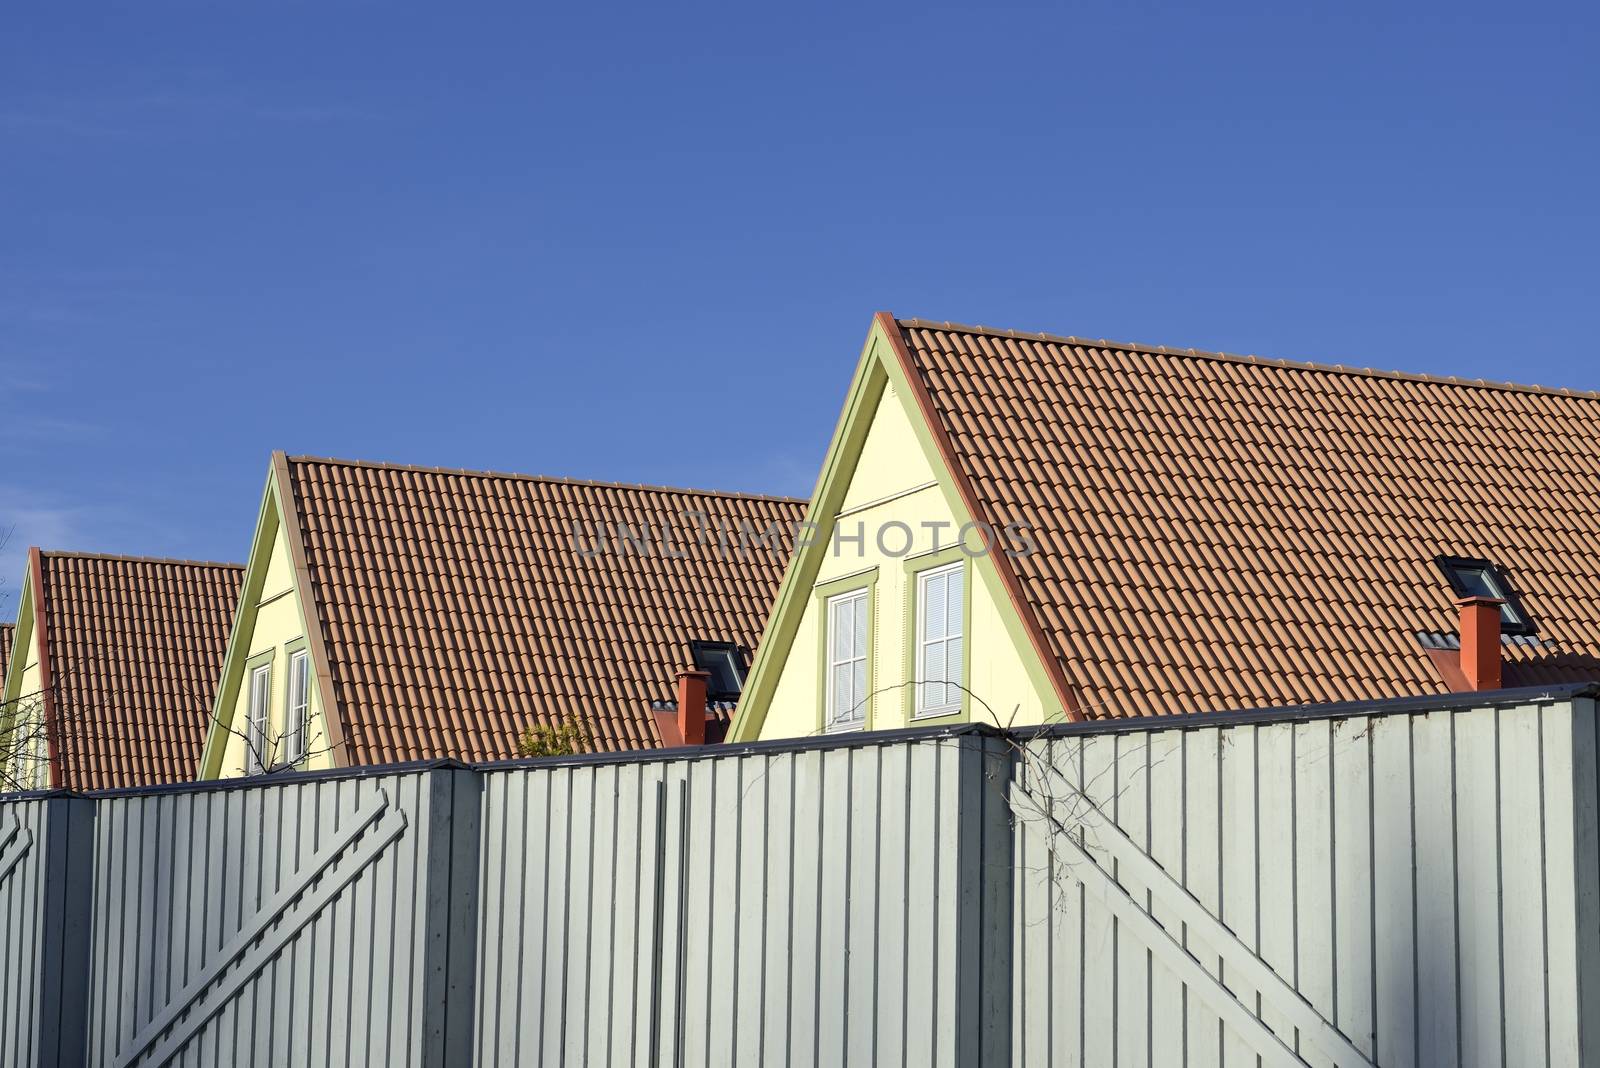 Photograph of a new house rooftop against a clear blue sky.